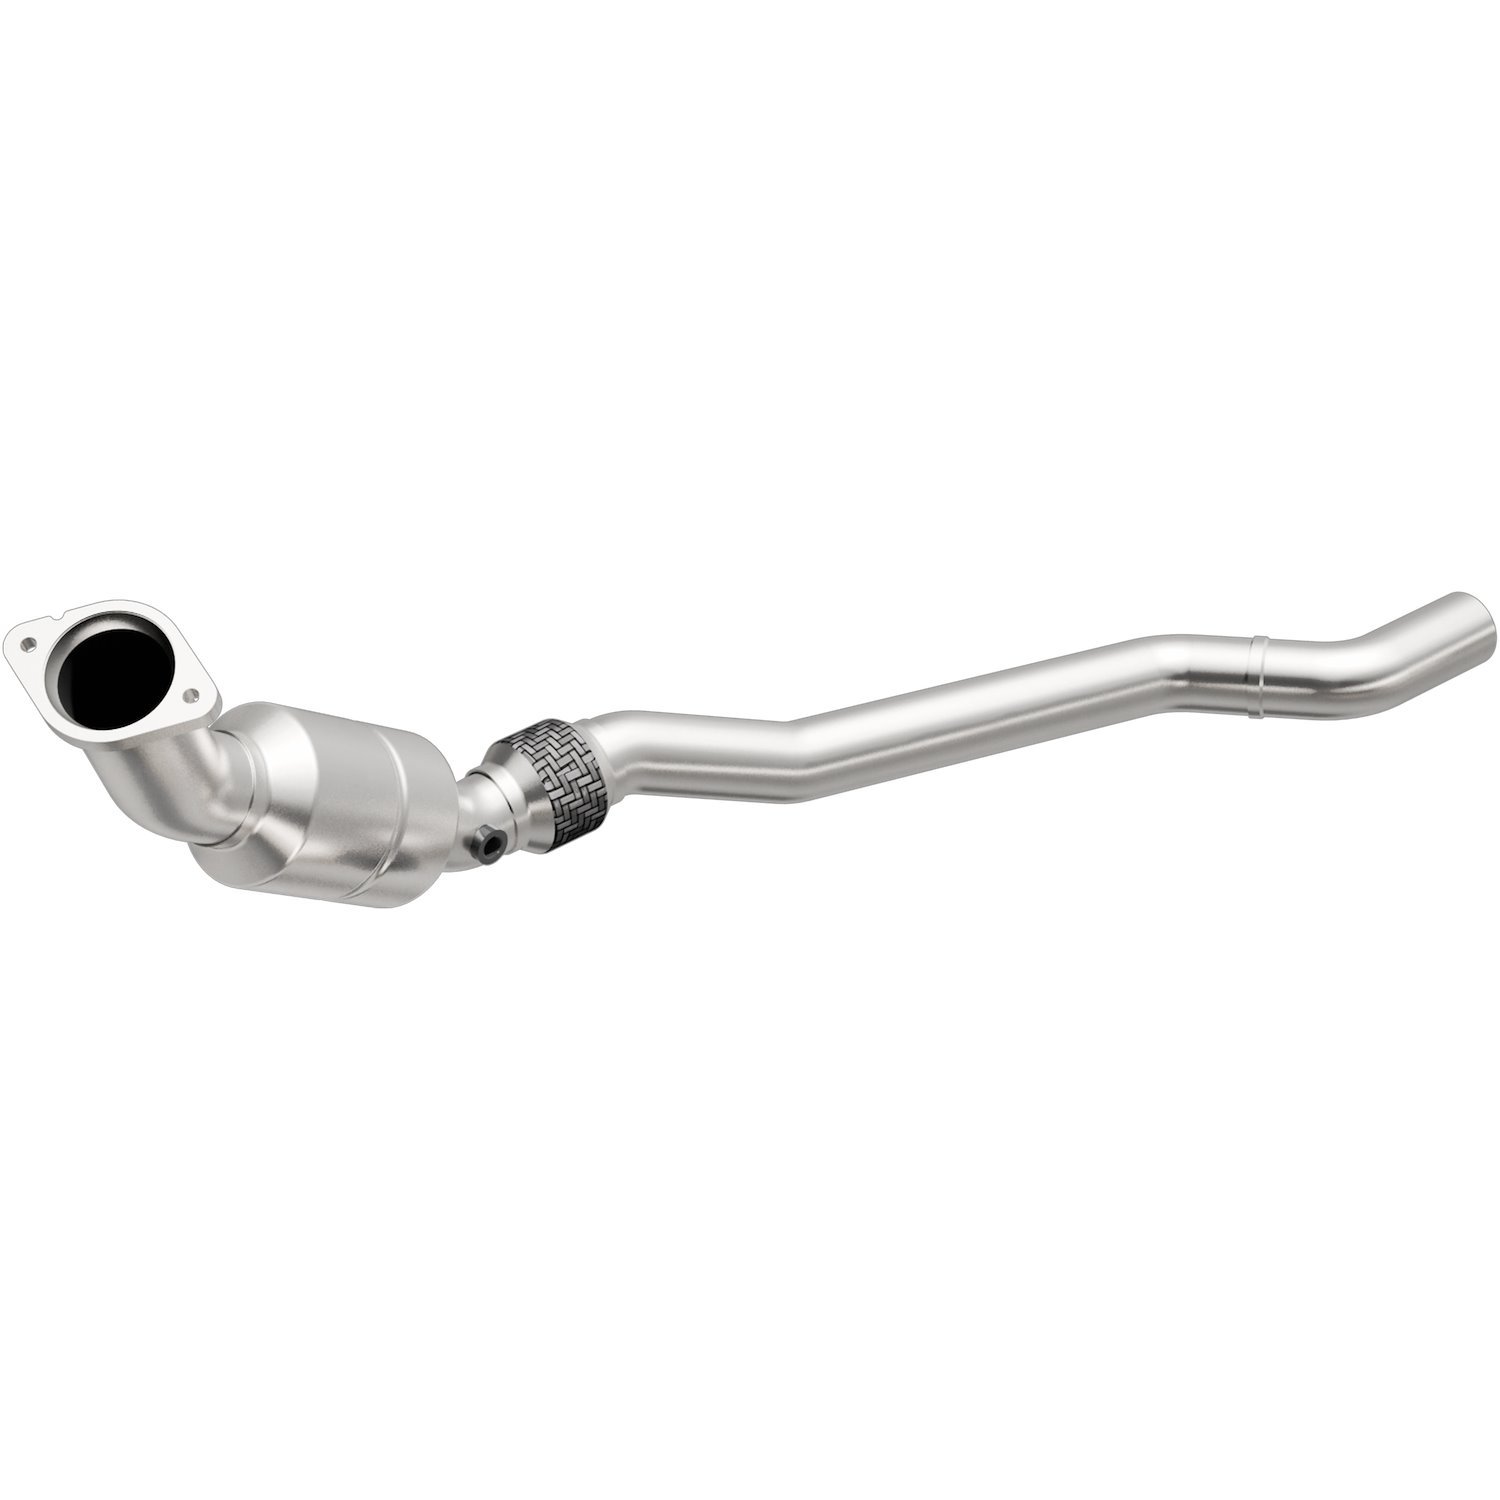 OEM Grade Federal / EPA Compliant Direct-Fit Catalytic Converter 51585